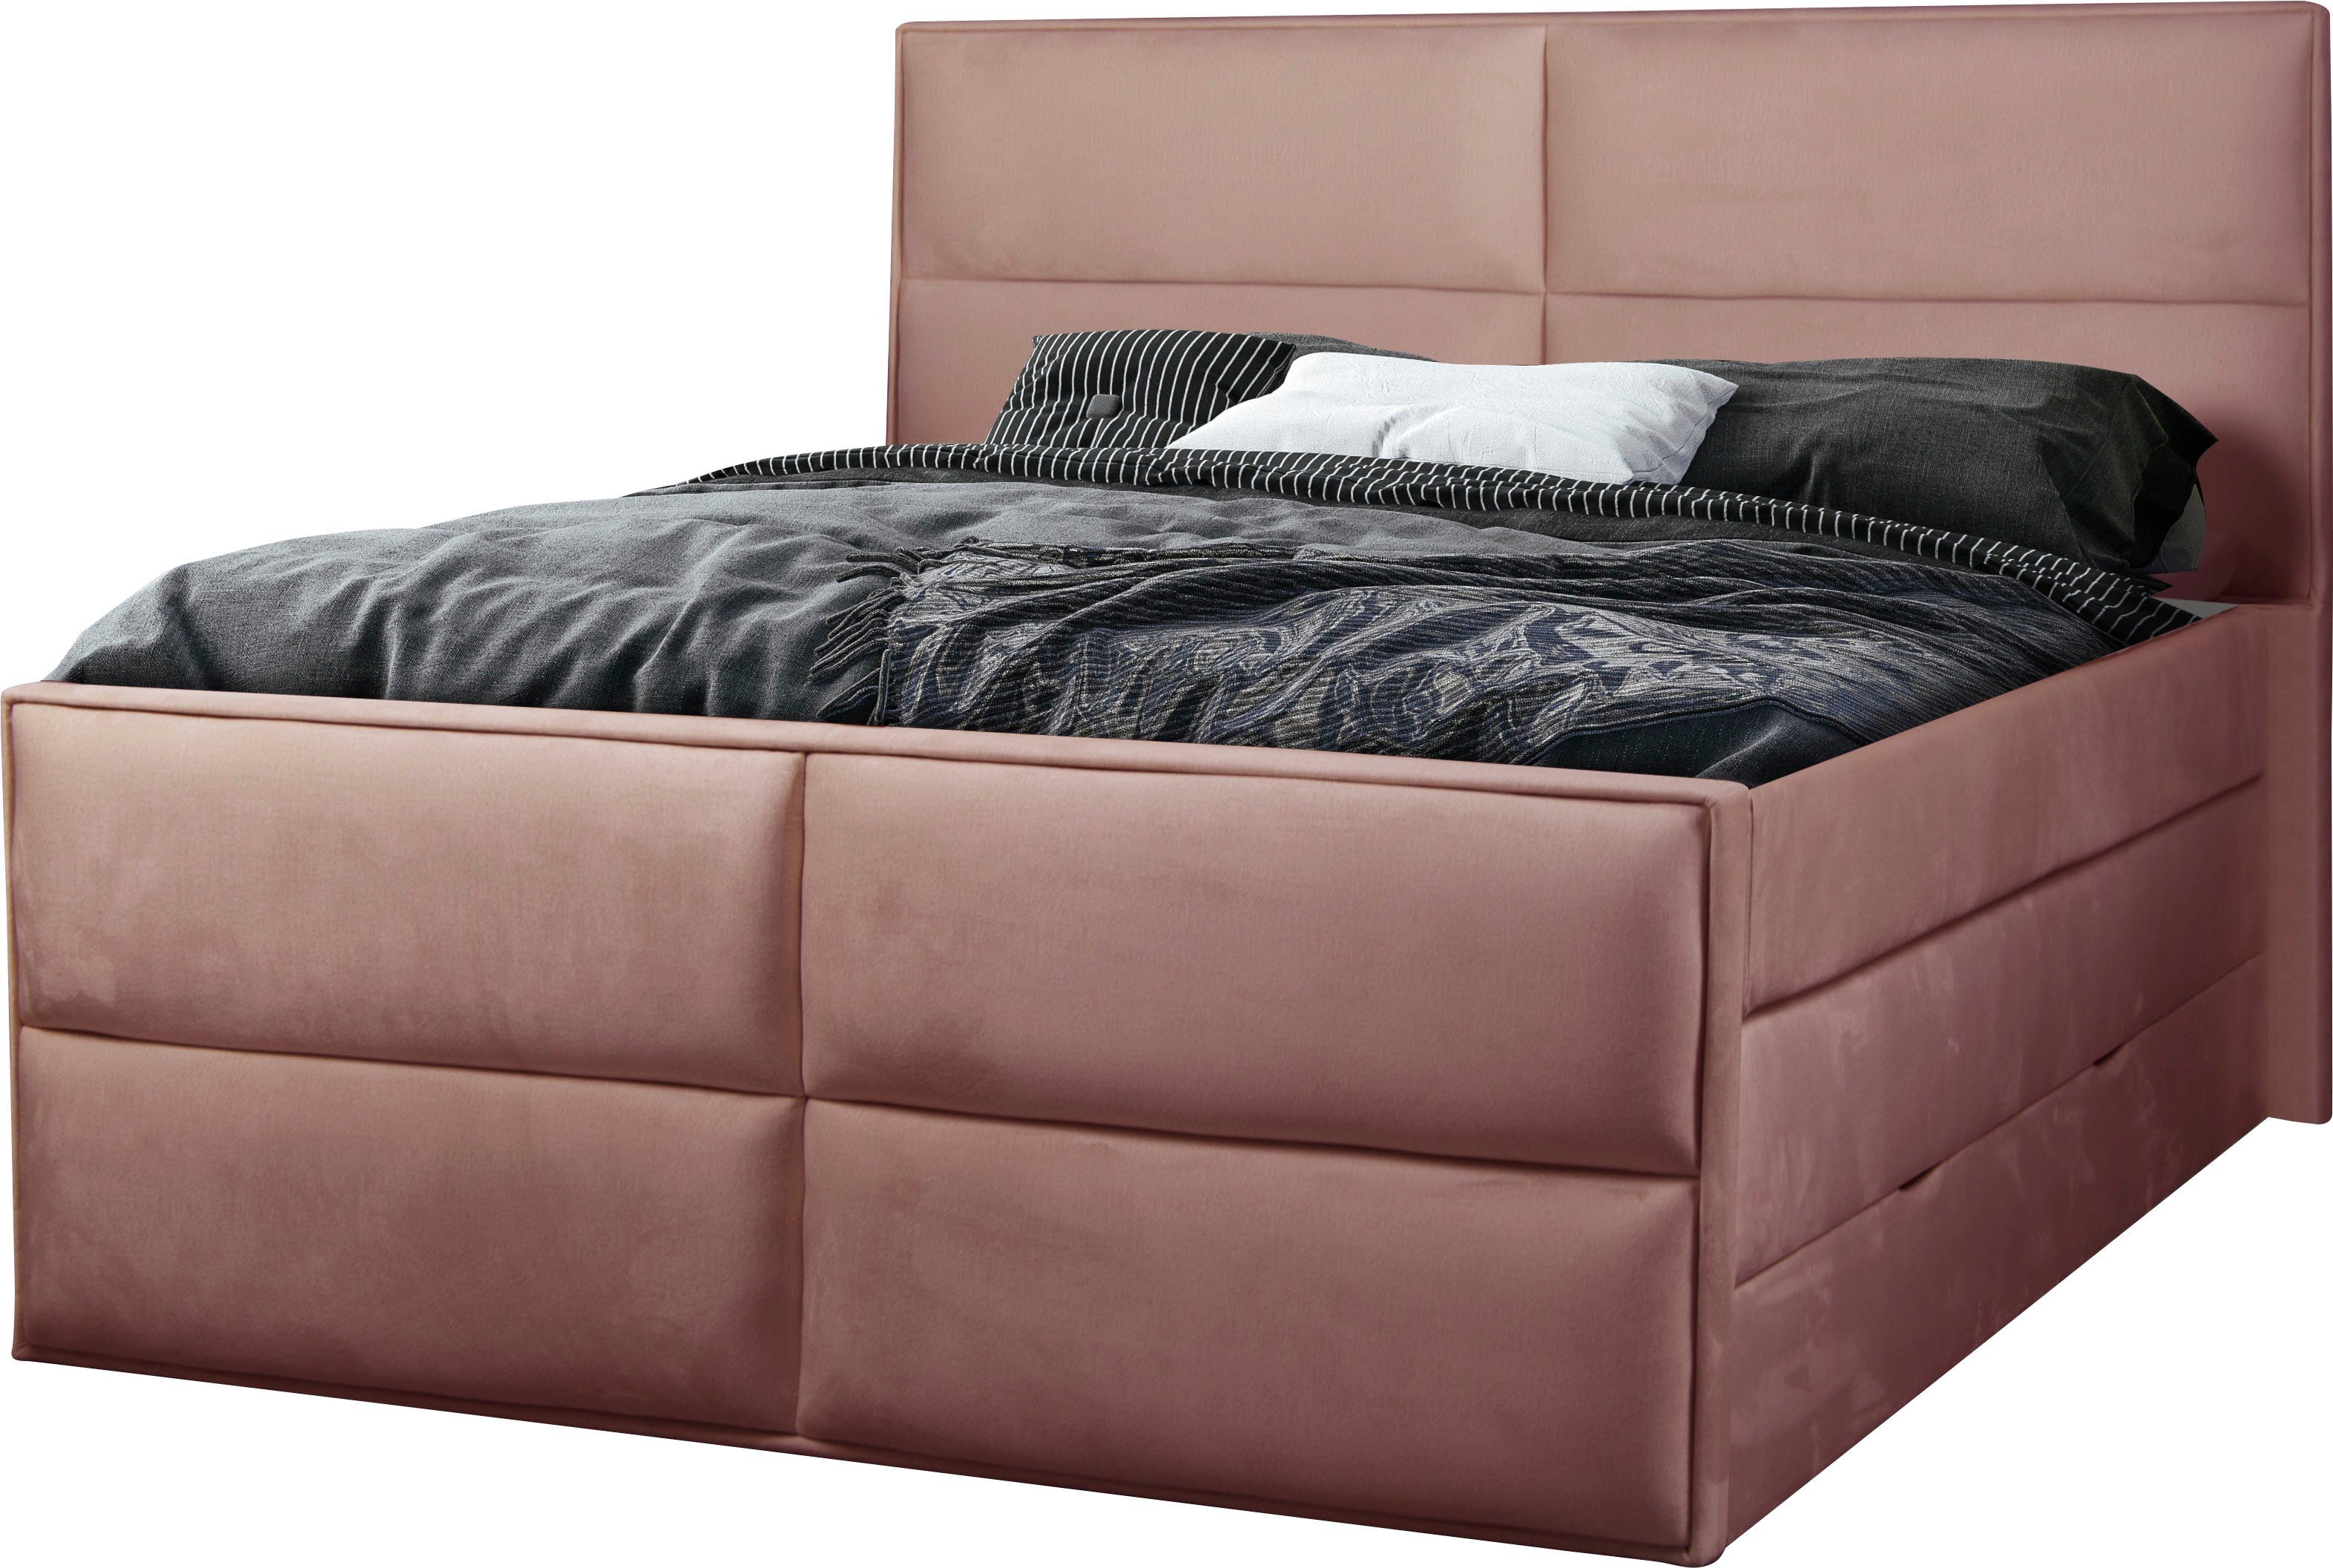 Places of Style Boxspring Williston